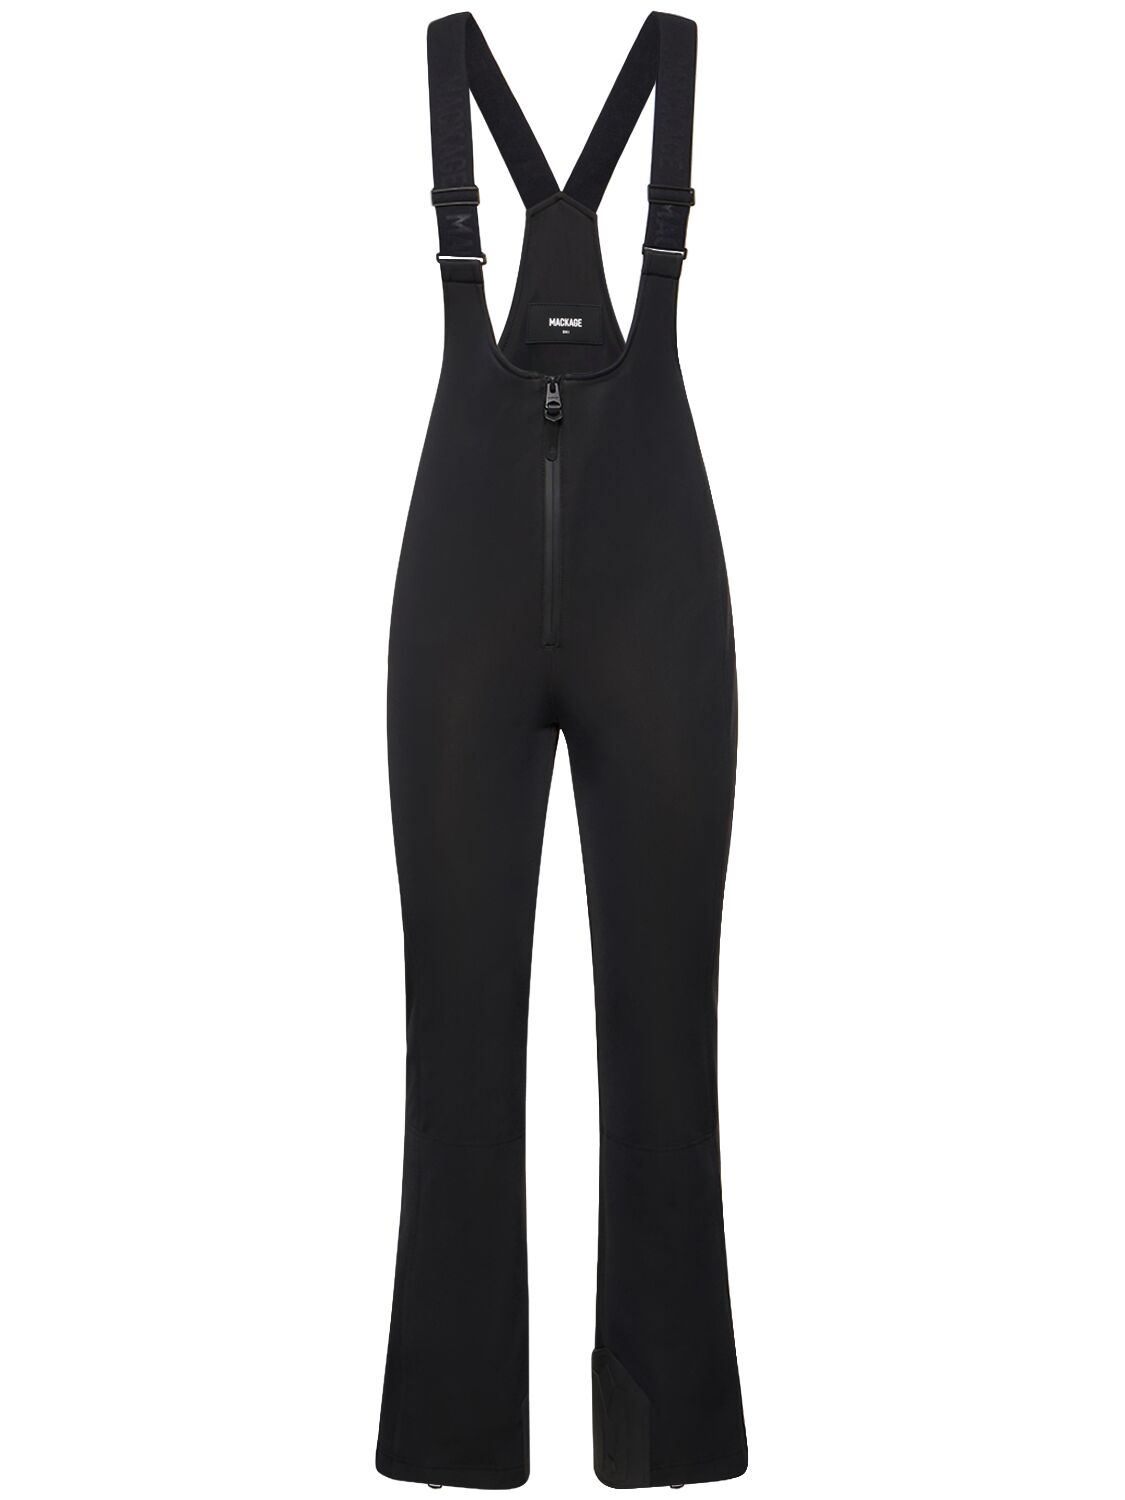 Gia Ski Pants – WOMEN > CLOTHING > JUMPSUITS & ROMPERS